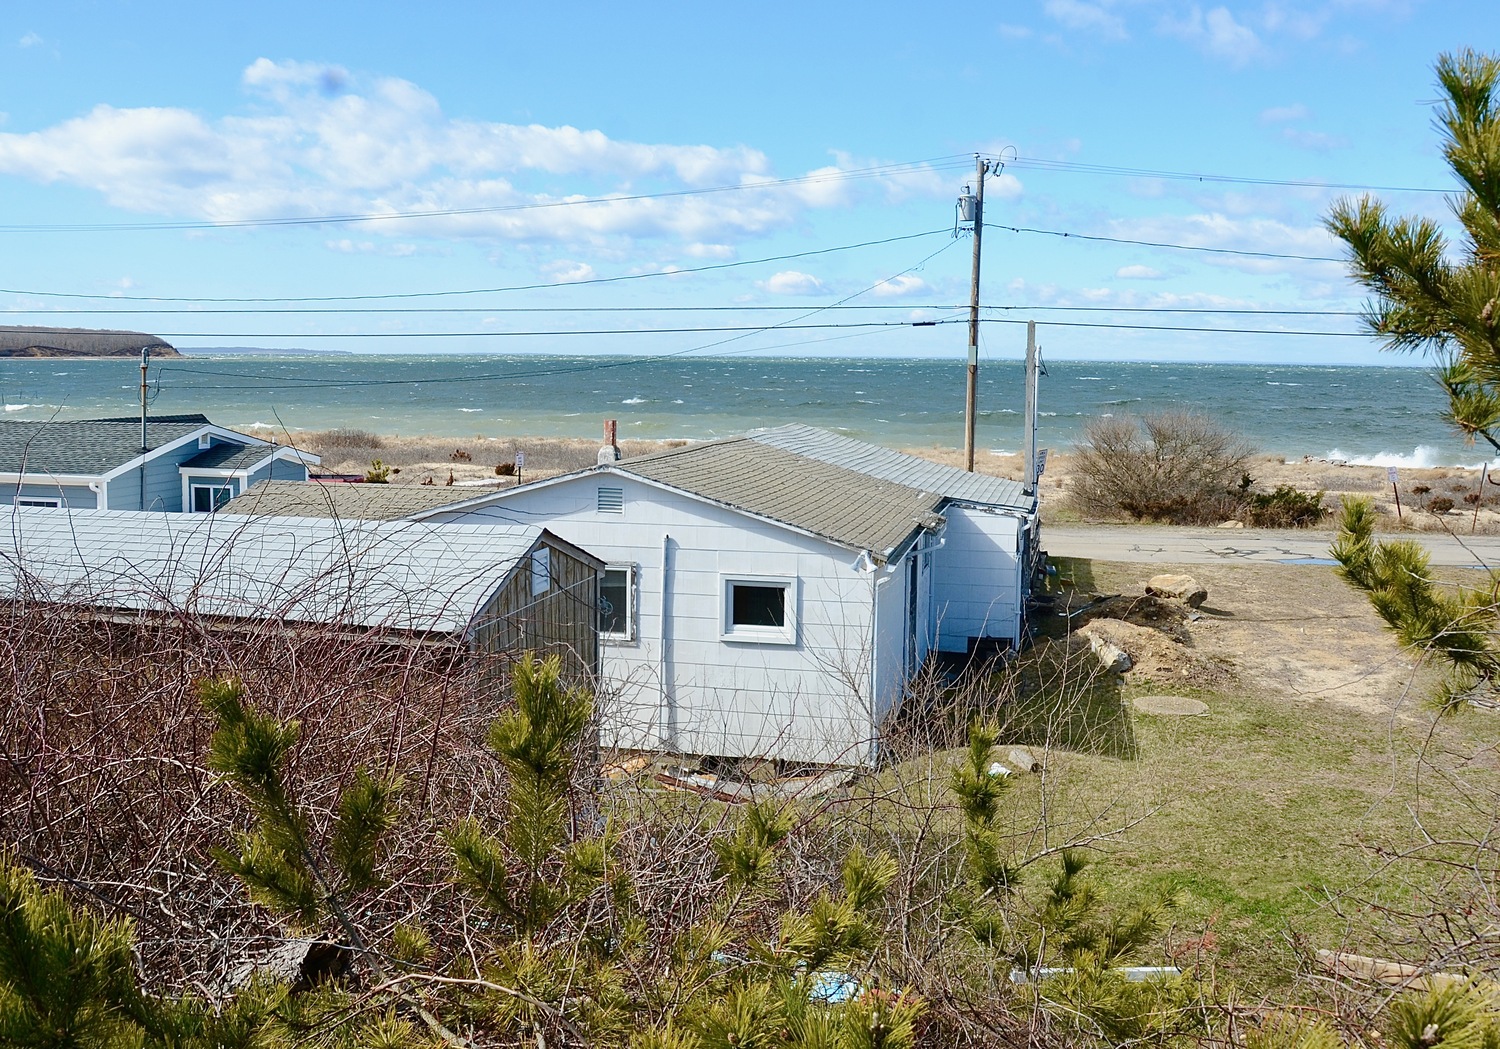 East Hampton Town has agreed to purchase a tiny Navy Road parcel, less than 2-tenths of an acre in size, for just over $1 million. The ramshackle cottage on the land now will be razed by the current owner before handing the land over to the town. KYRIL BROMLEY